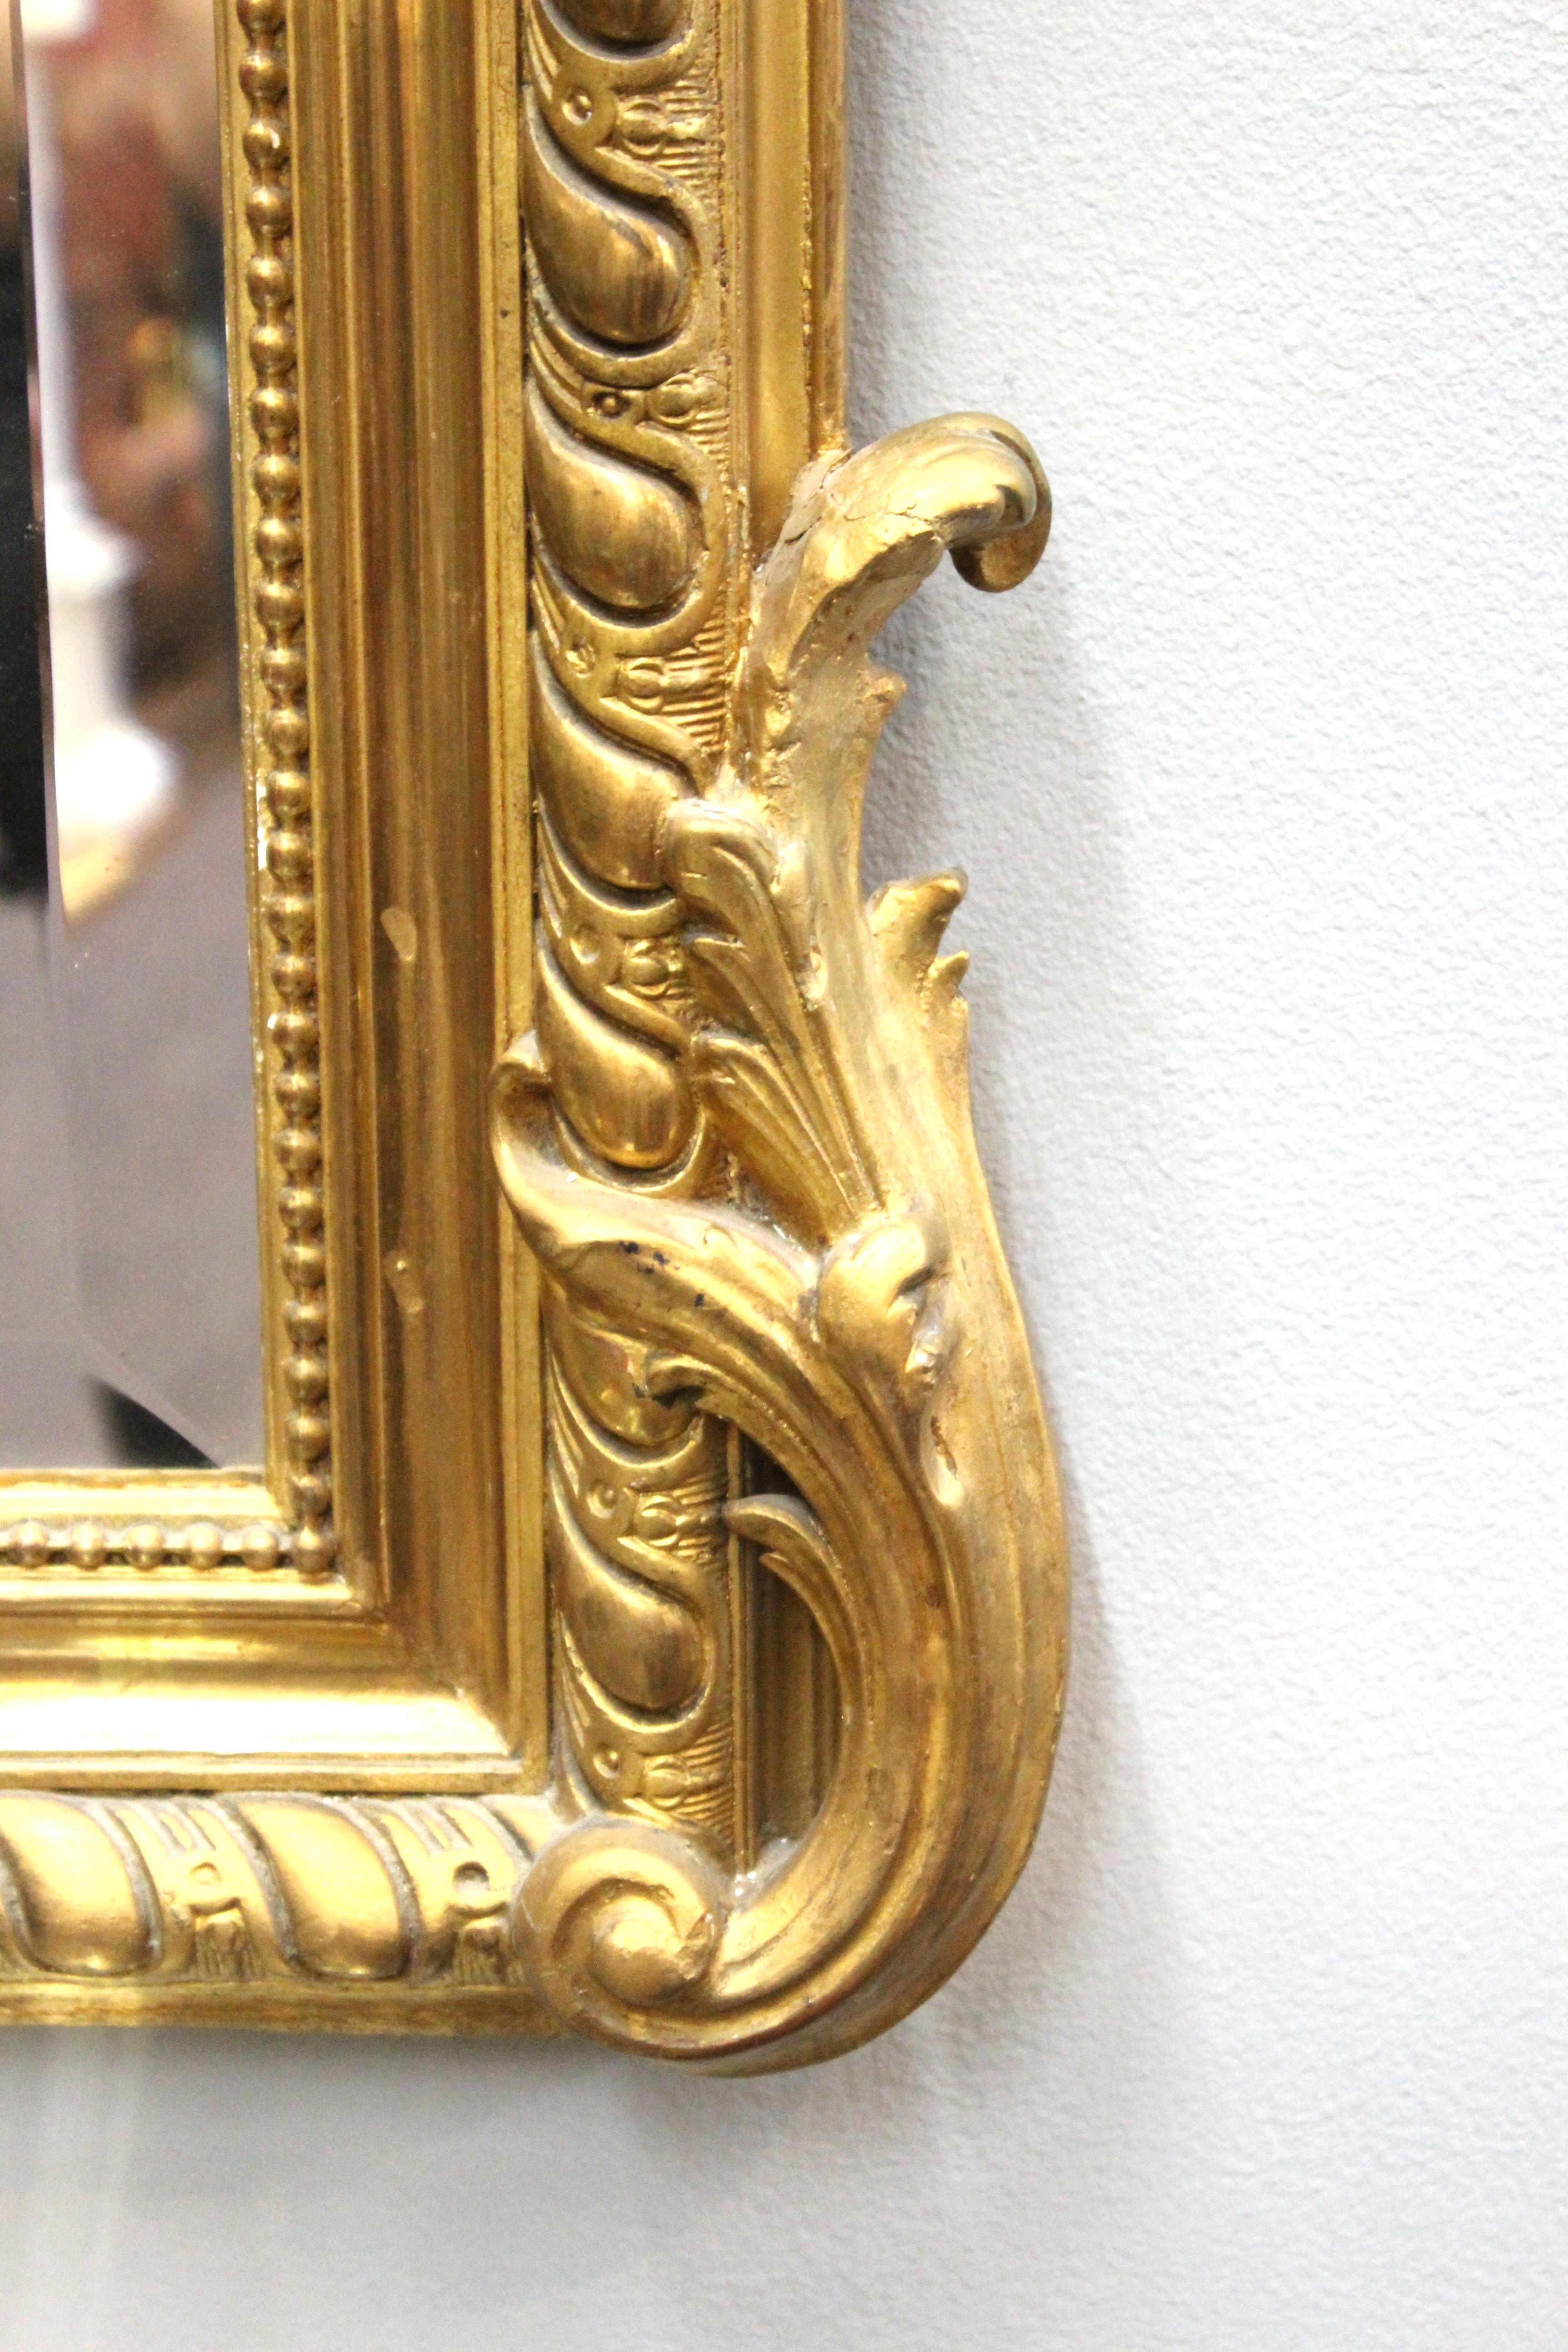 19th Century French Baroque Revival Giltwood Wall Mirror